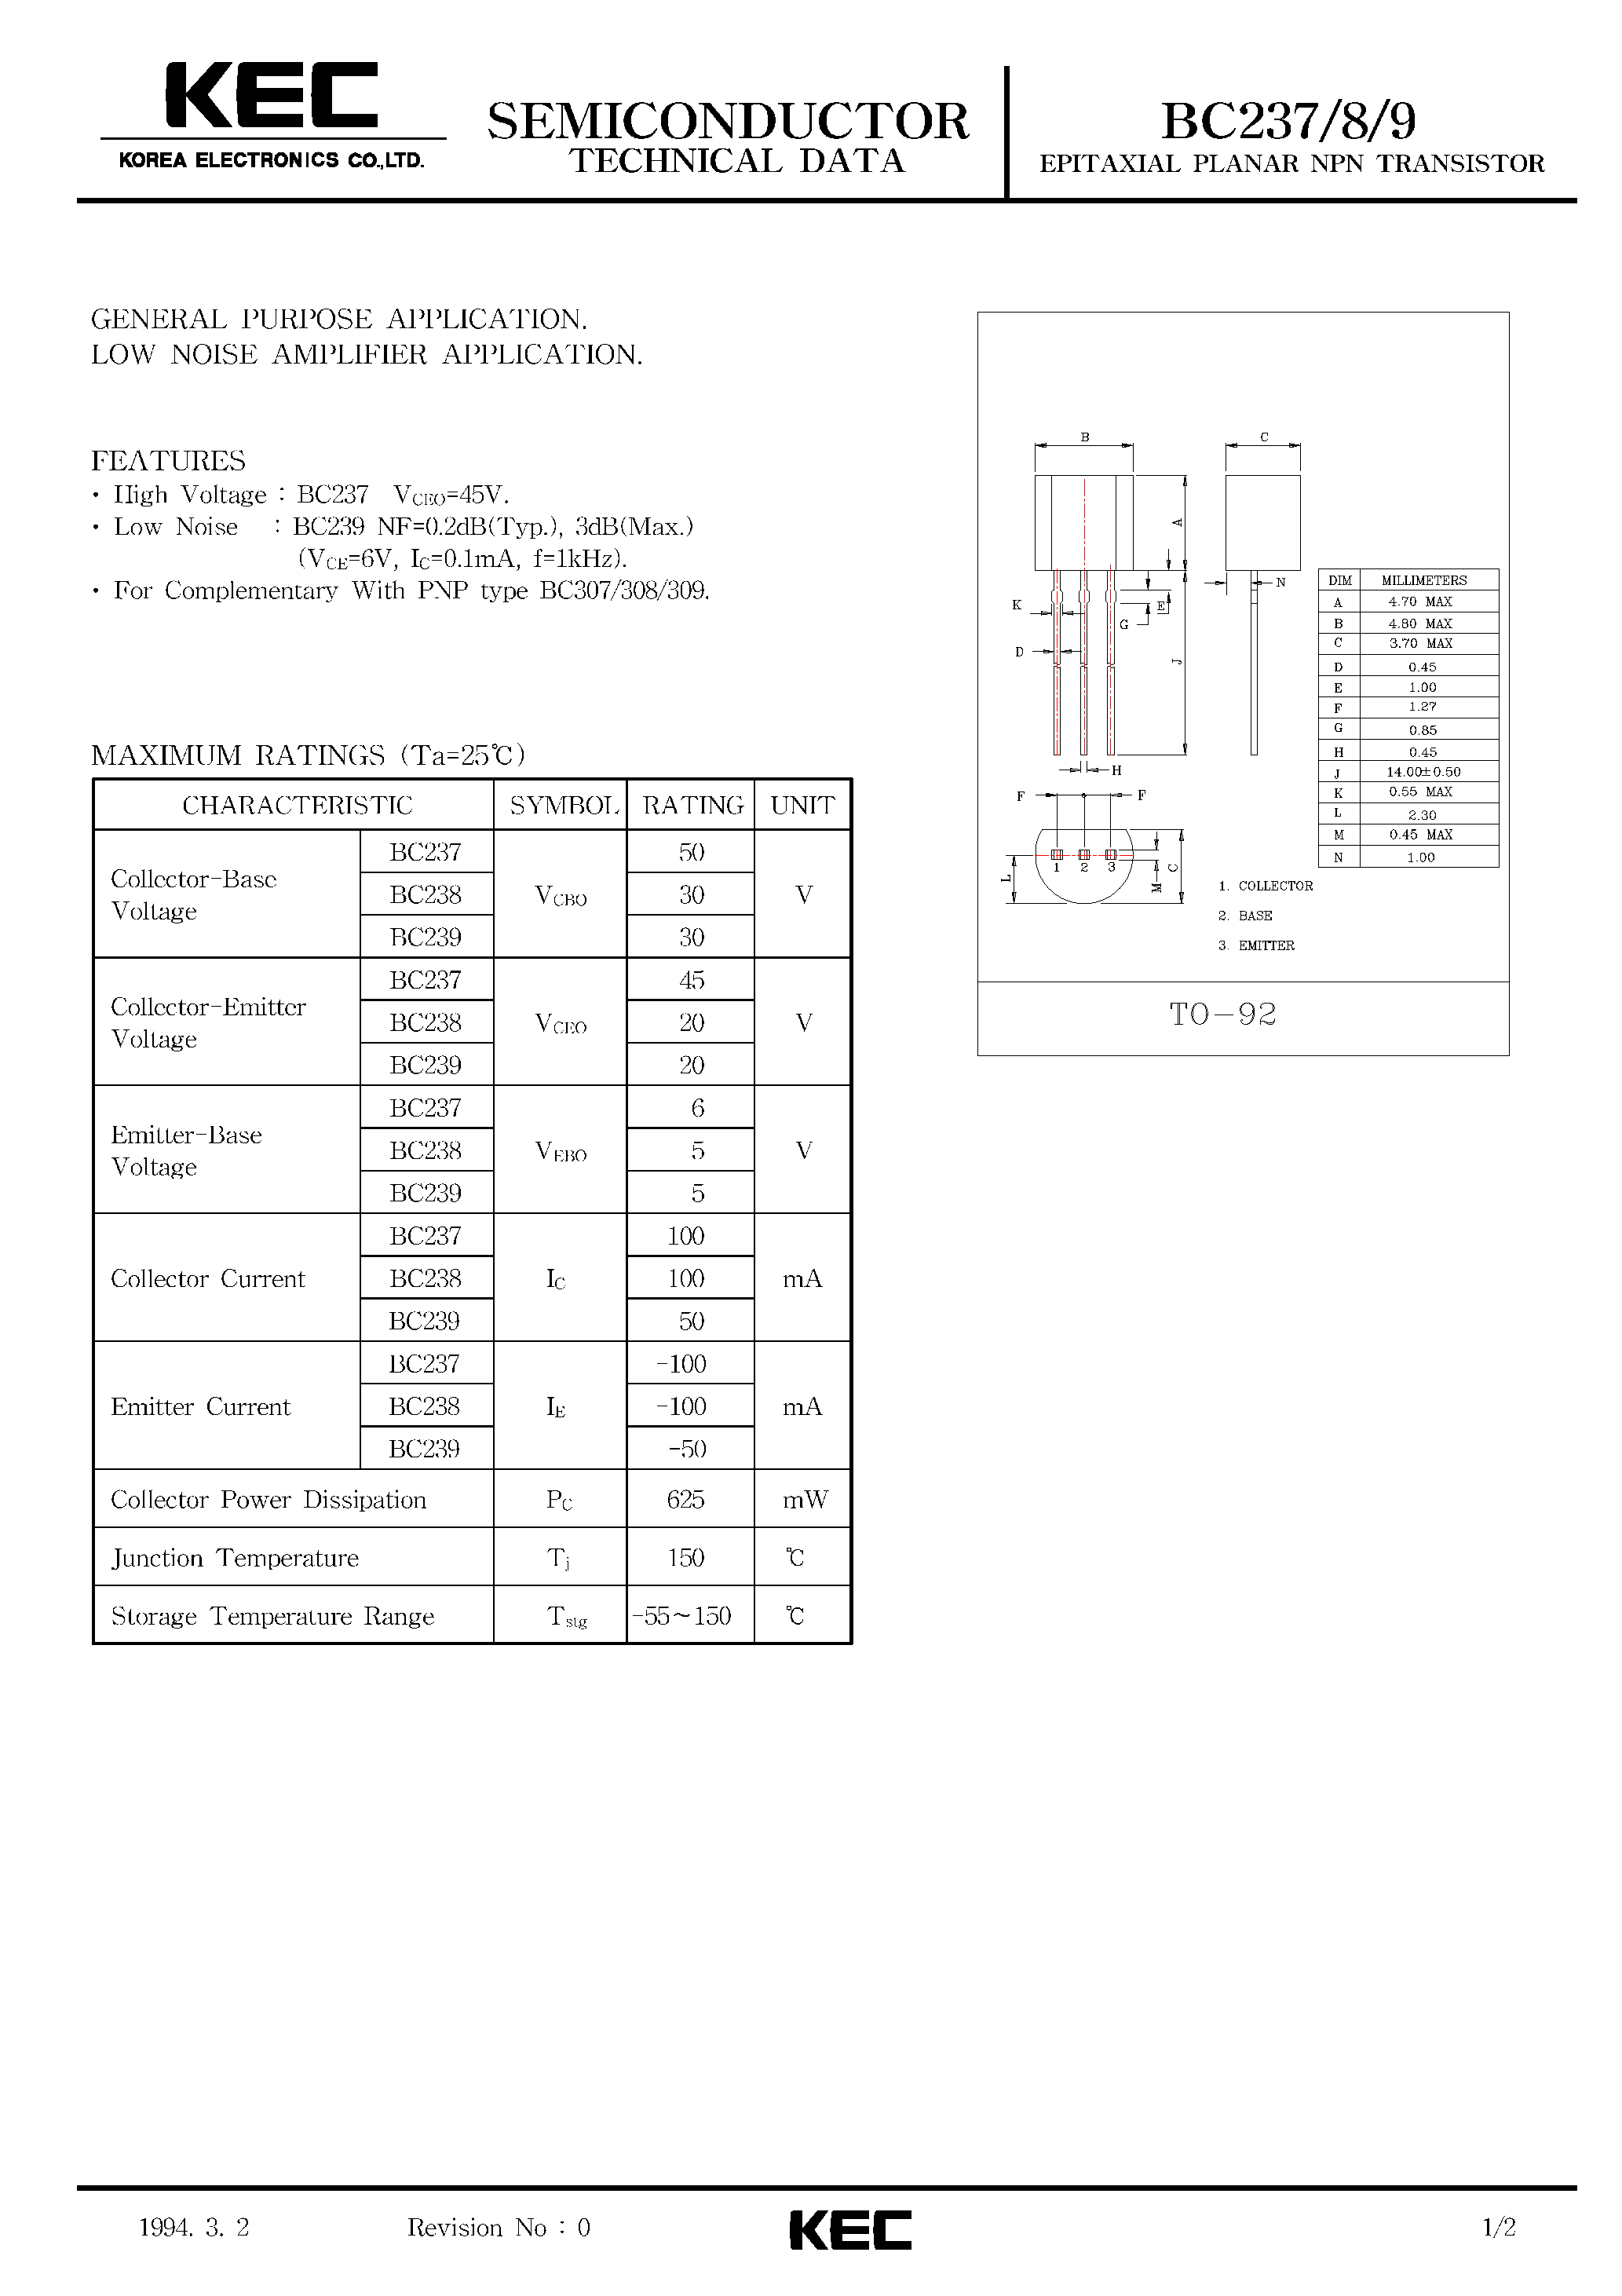 Даташит BC238 - EPITAXIAL PLANAR NPN TRANSISTOR (GENERAL PURPOSE / LOW NOISE AMPLIFIER) страница 1